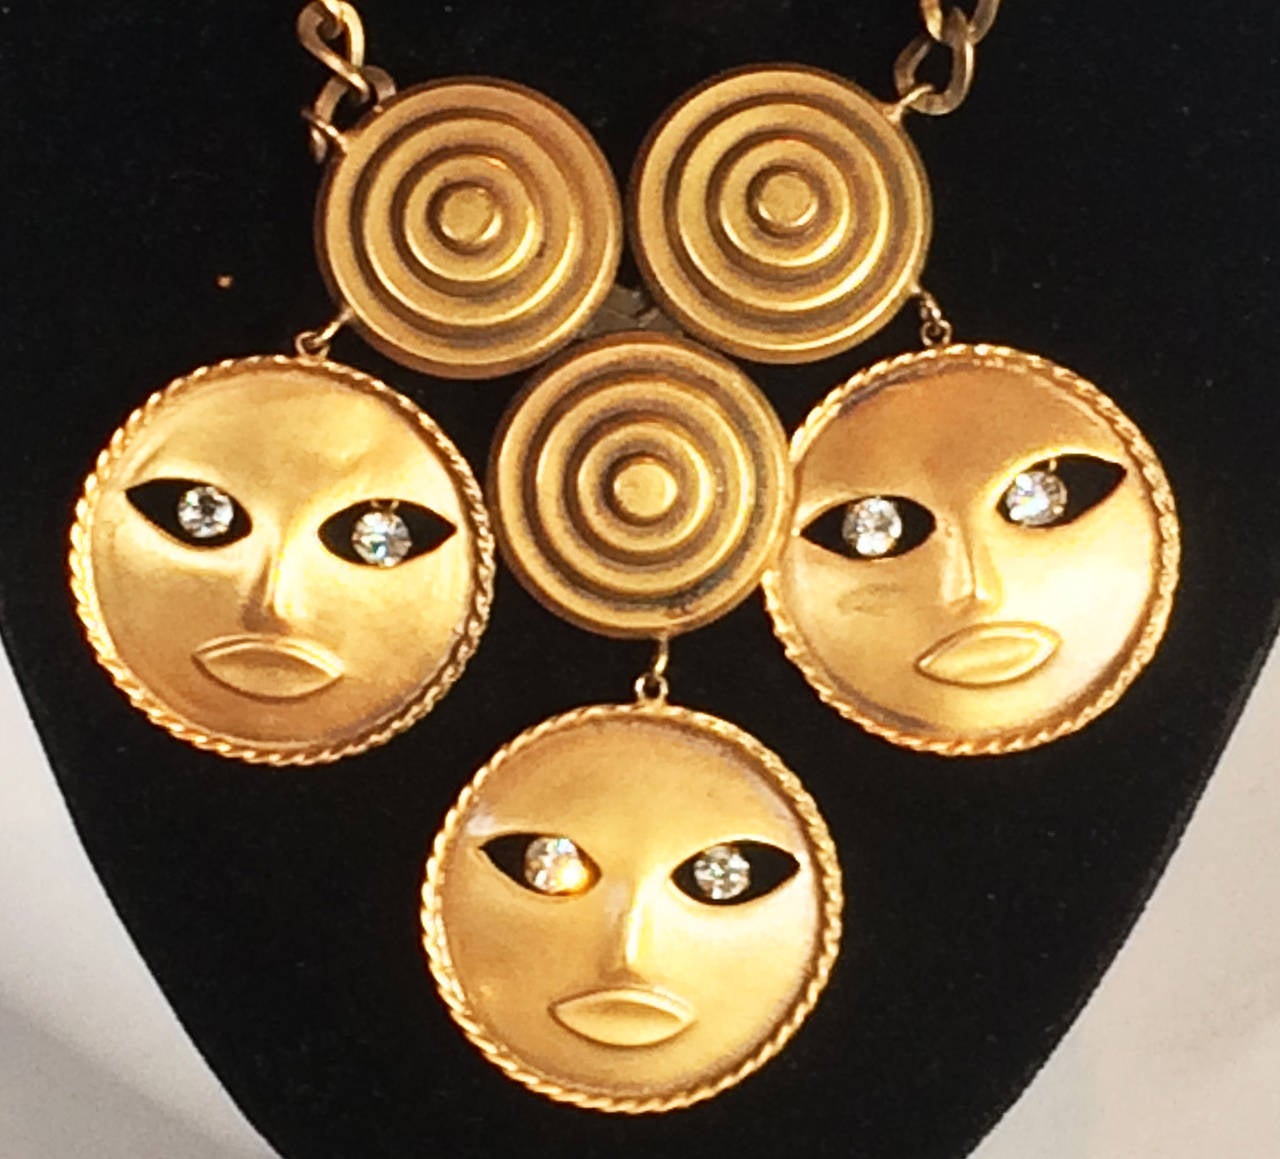 1930s Rare Joseff of Hollywood, “Moon Face Necklace”, signed to rear of each of the 3 moons. Overall perfect condition, including original clasp and perfect Diamantes. No damage or repairs. Dimensions are approx..: each Moon 42mm dia., overall